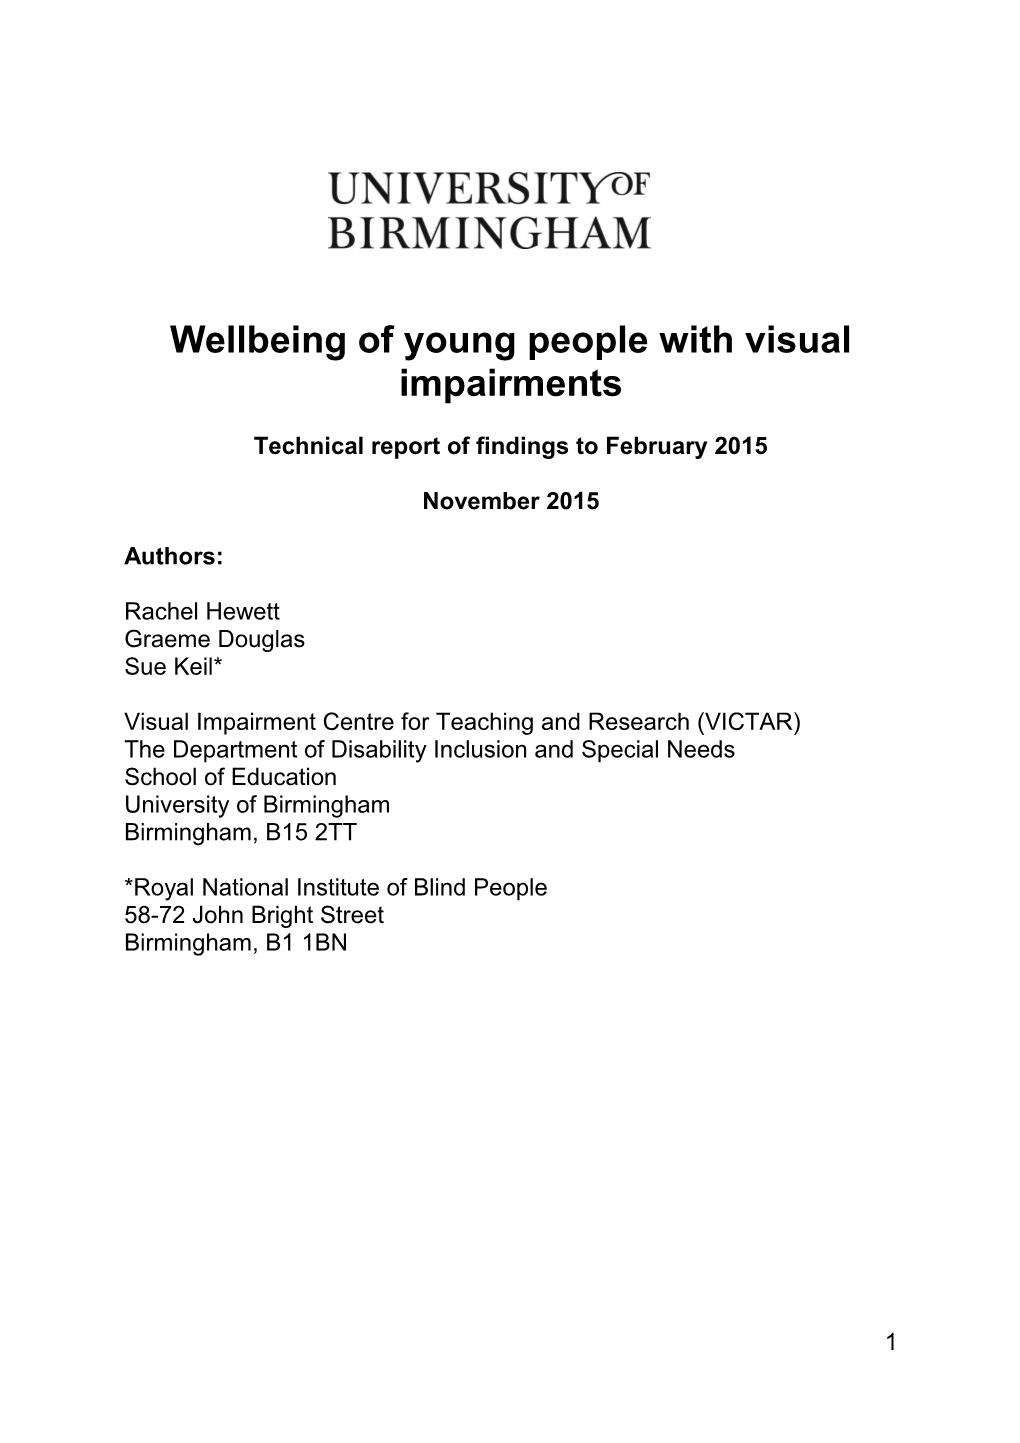 Wellbeing of Young People with Visual Impairments